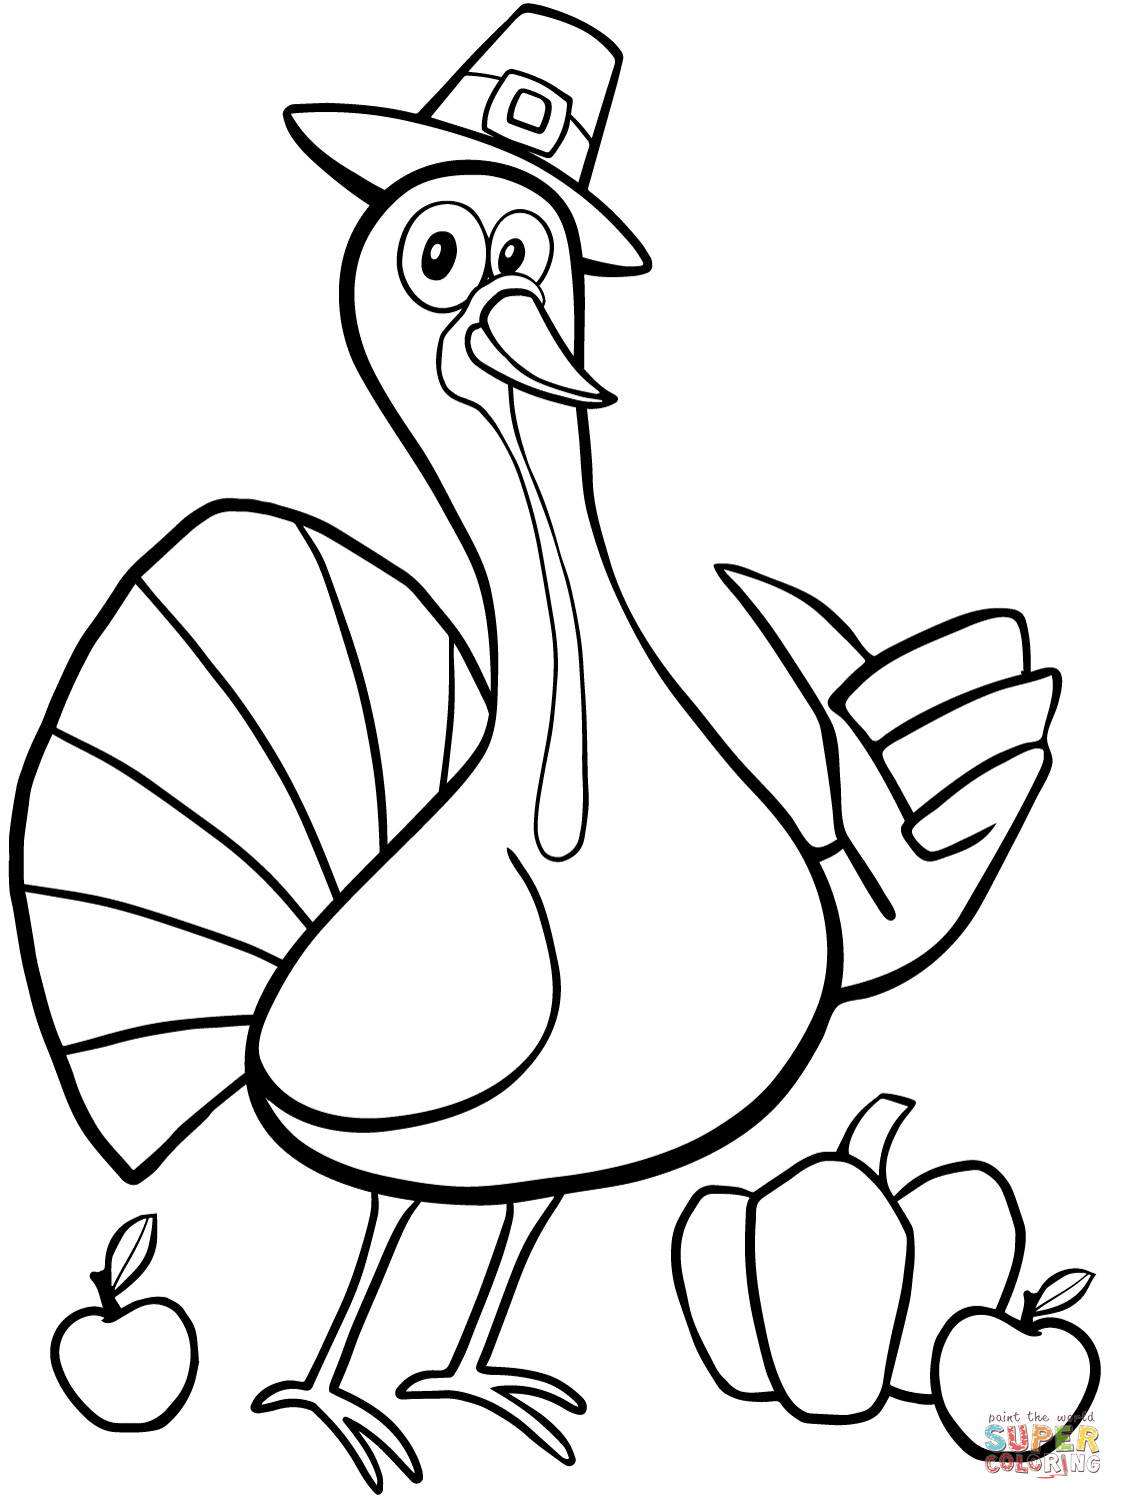 Thanksgiving Turkey Coloring Pages
 Cool Thanksgiving Turkey coloring page